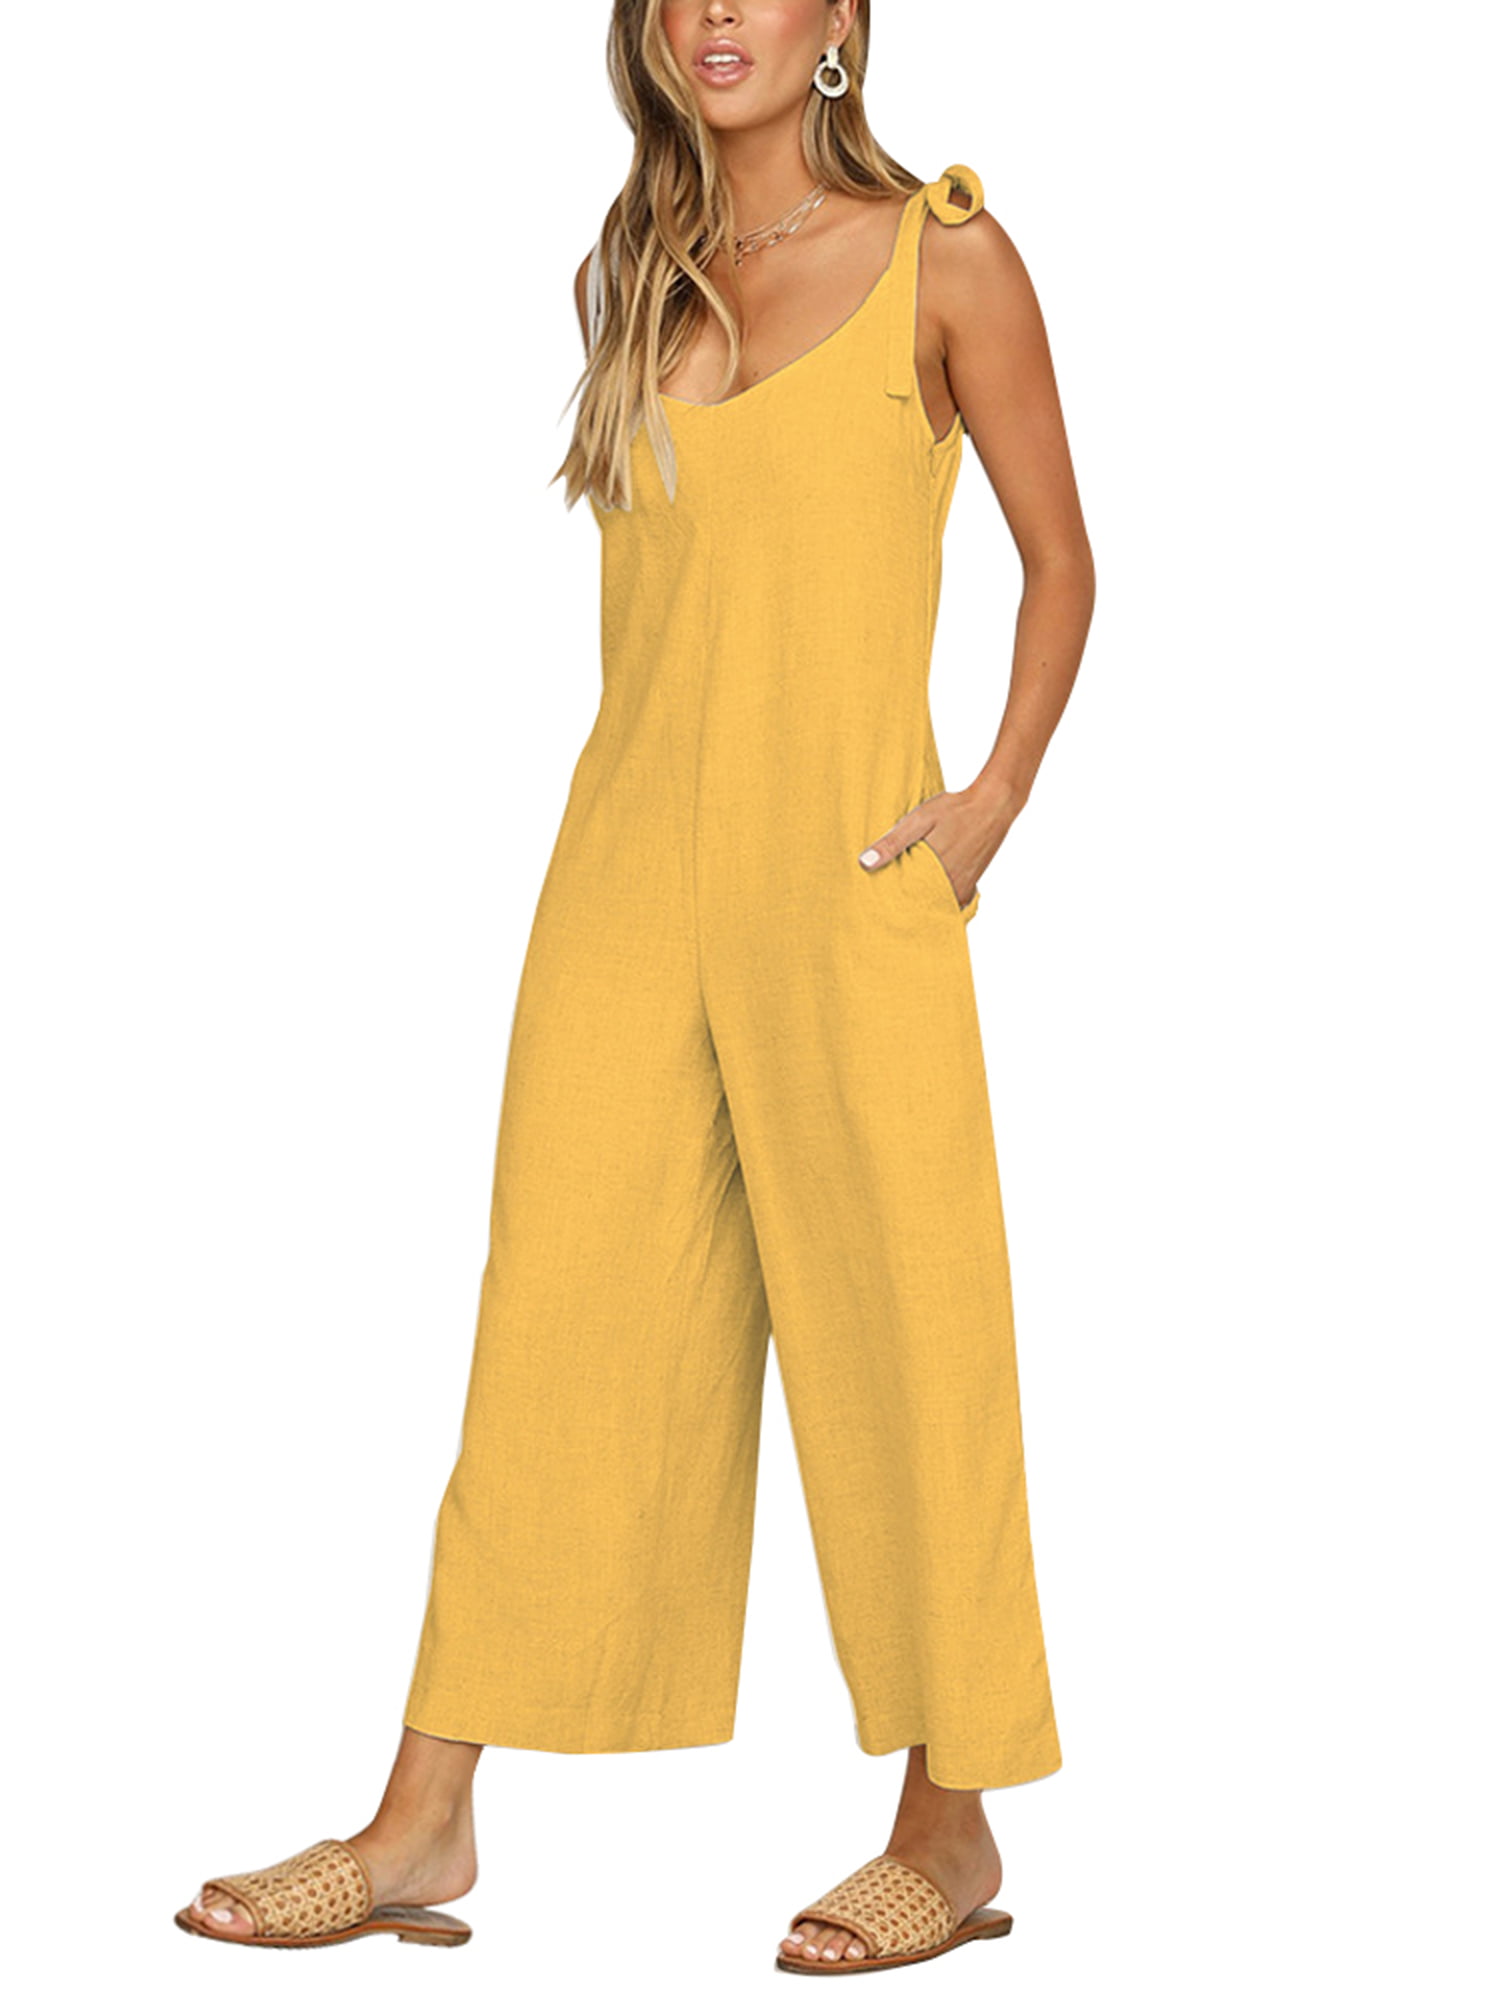 Women Summer Casual Loose Sleeveless Wide Leg Jumpsuit Overalls Trousers Romper 